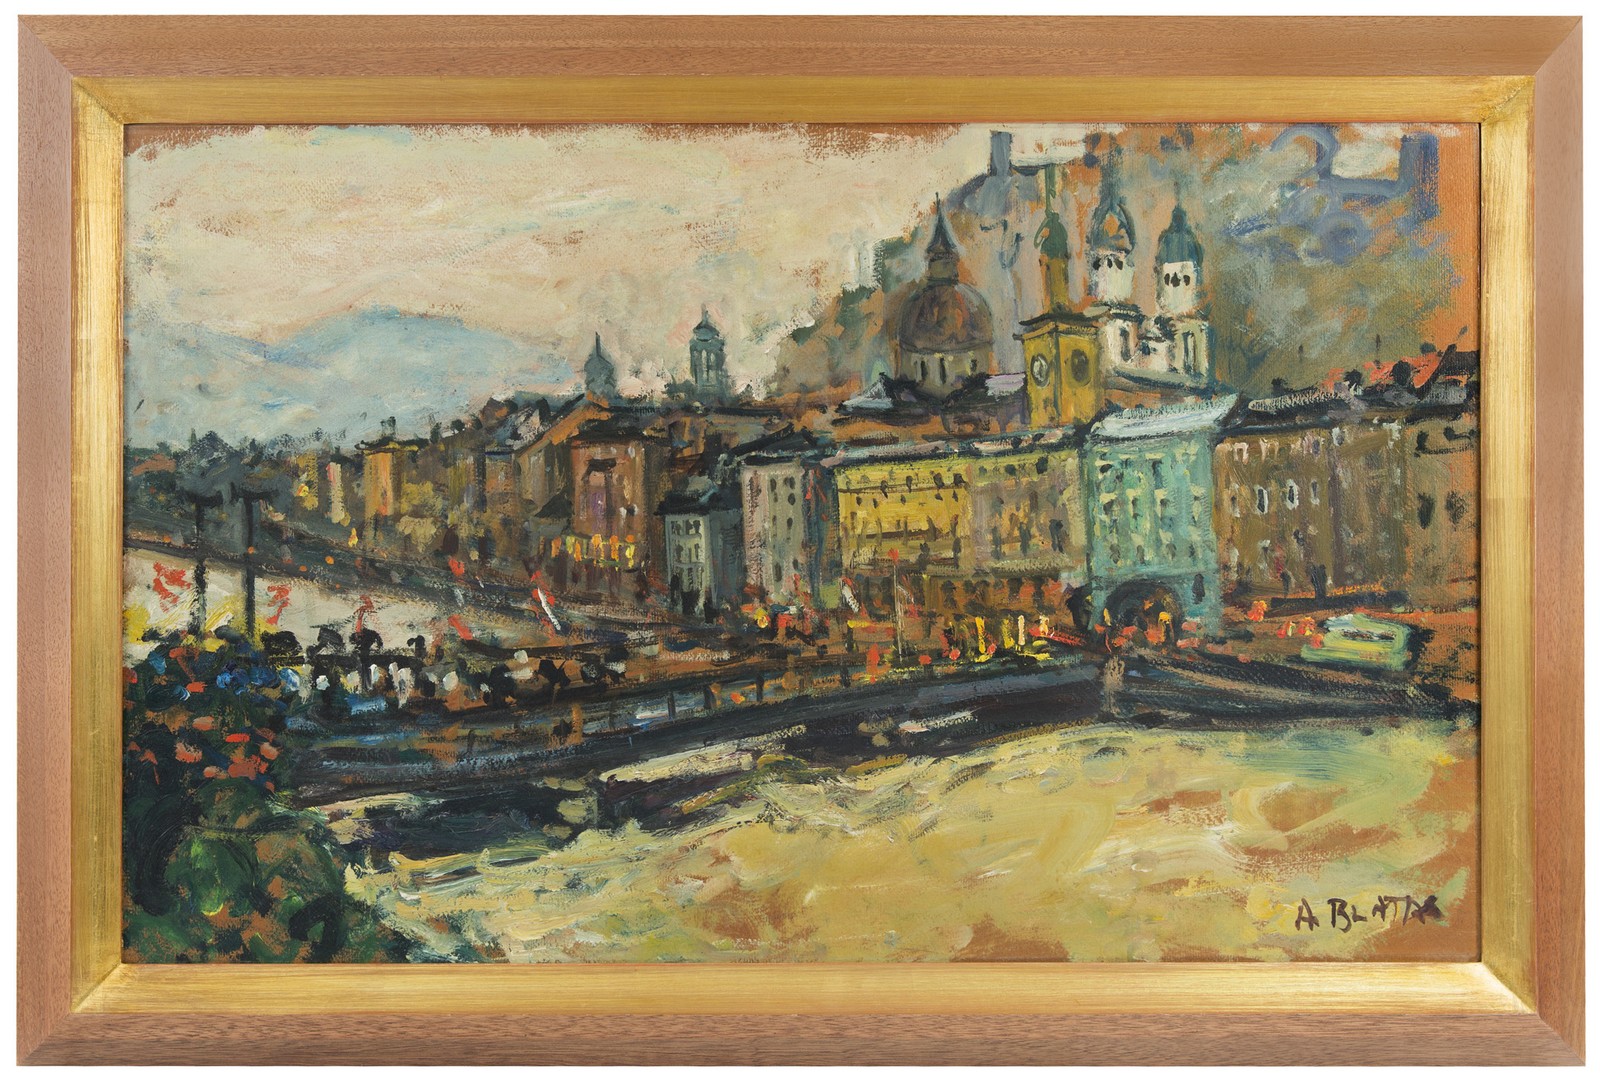 ARBIT BLATAS (LITHUANIAN-AMERICAN 1908-1999)Salzburg, oil on panel50 x 80 cm (19 3/4 x 31 1/2 in.) - Image 2 of 2